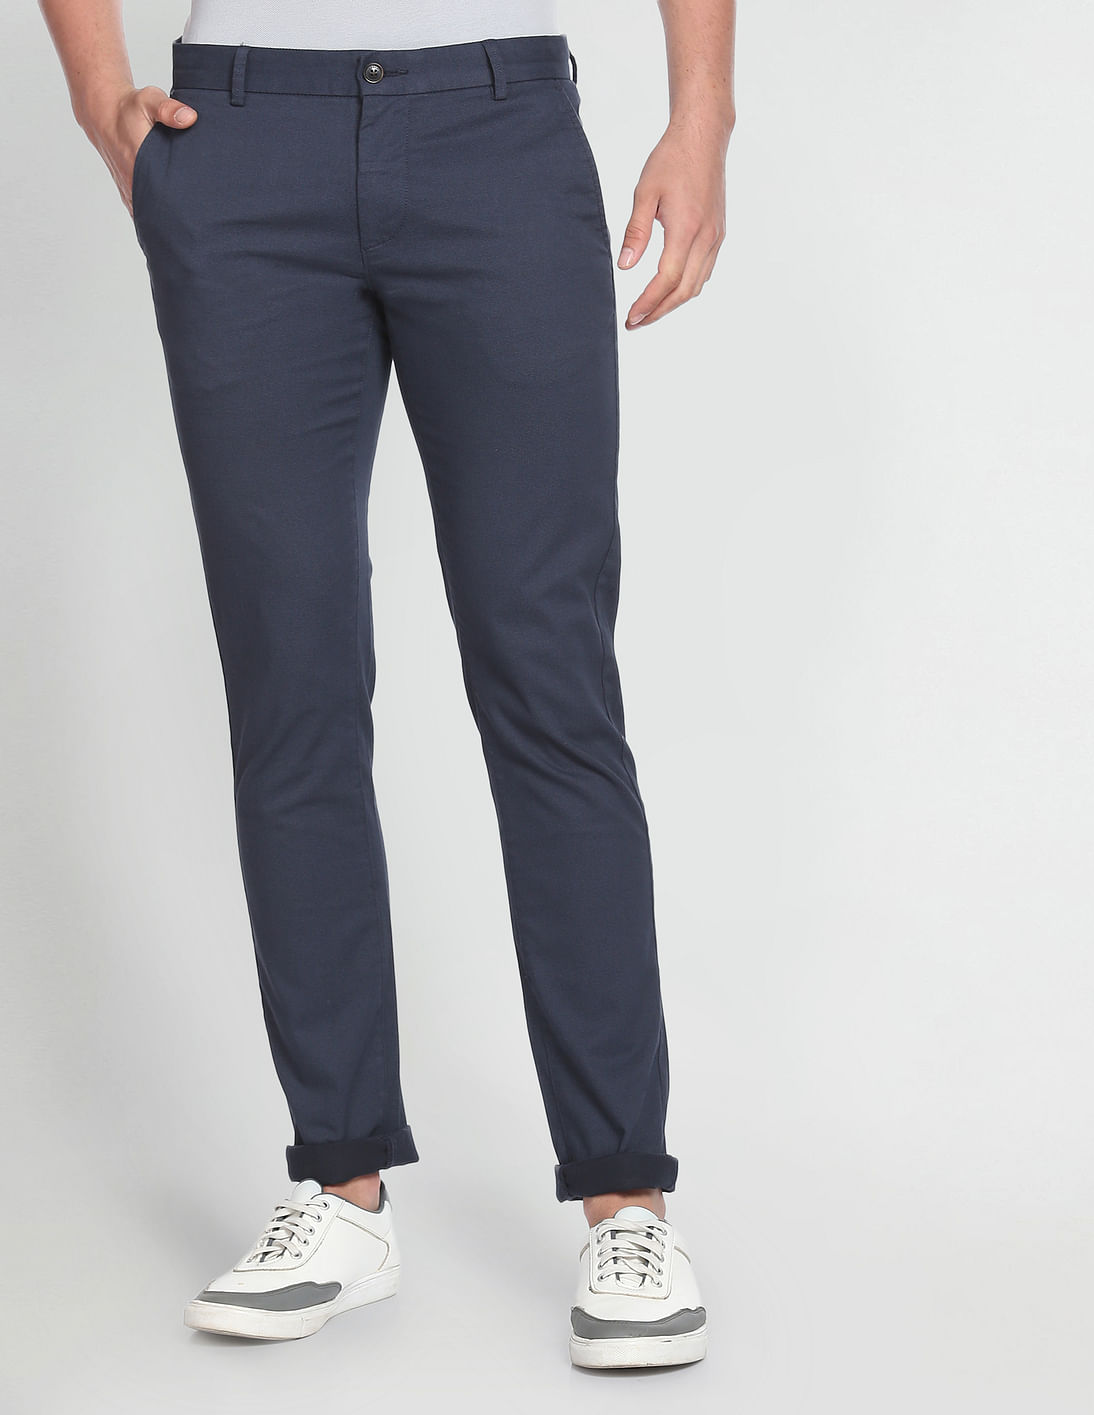 Buy Arrow Sports Slim Fit Satin Weave Casual Trousers - NNNOW.com